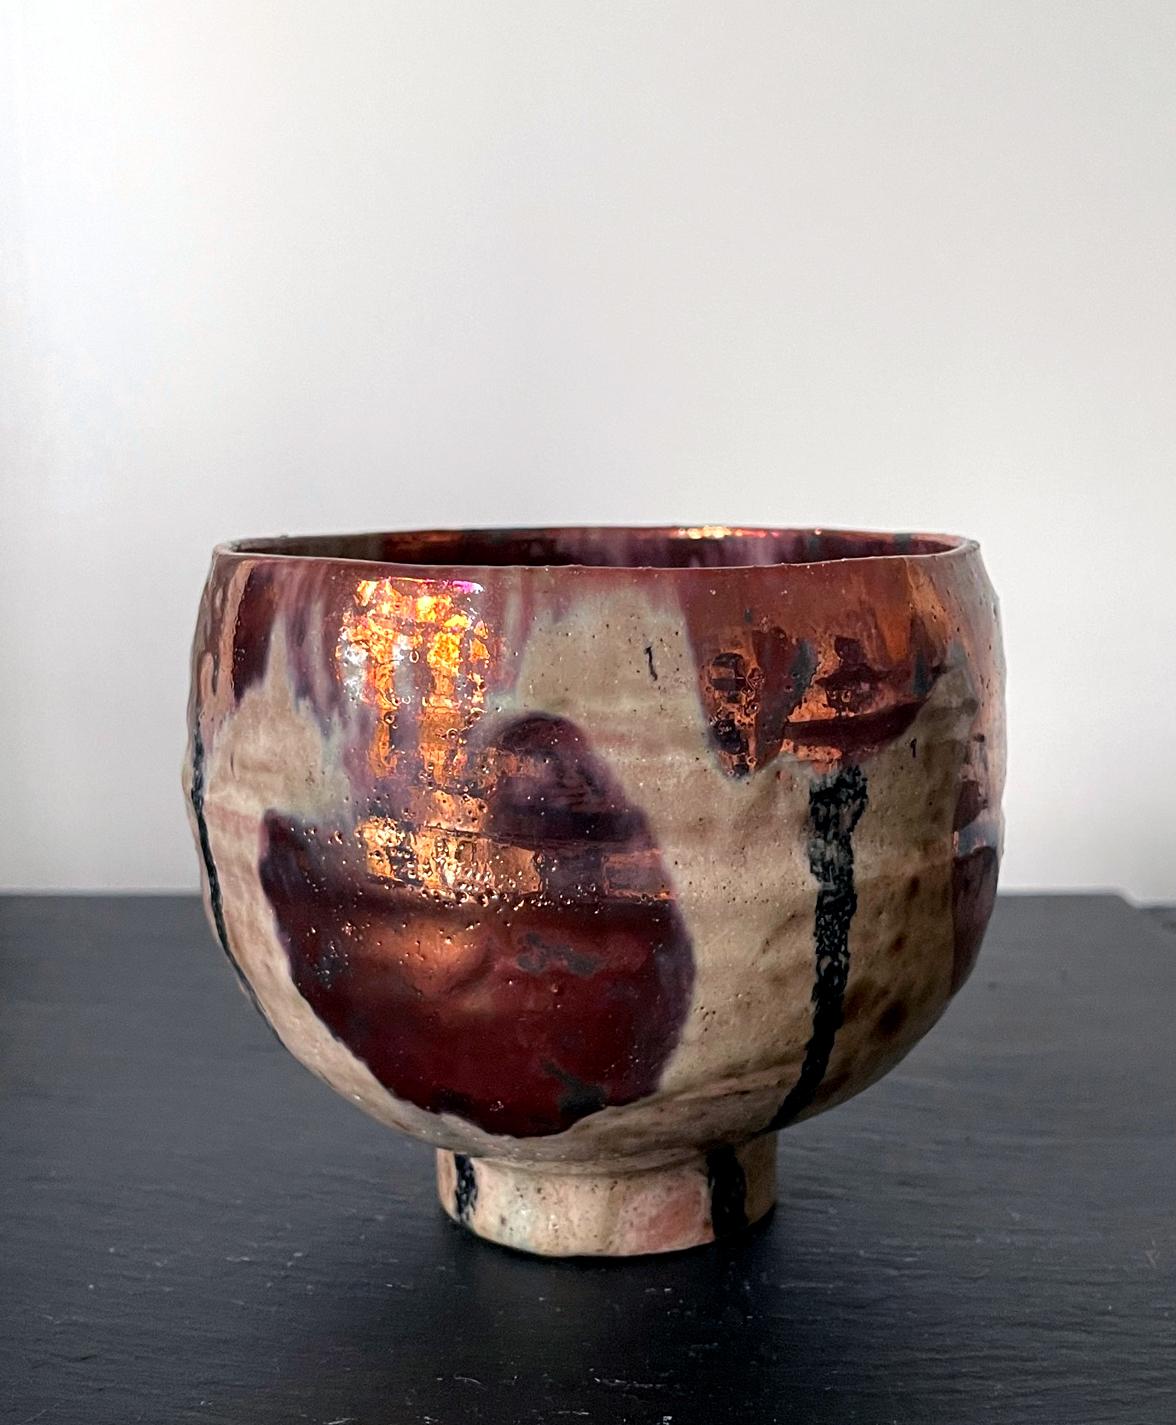 A ceramic lusterware tea bowl by American artist and studio potter Beatrice Wood (1893-1998). The piece, circa 1980s, is of an organic form typical of a Japanese tea bowl. The surface was applied with splashes and drips of a brilliant metallic